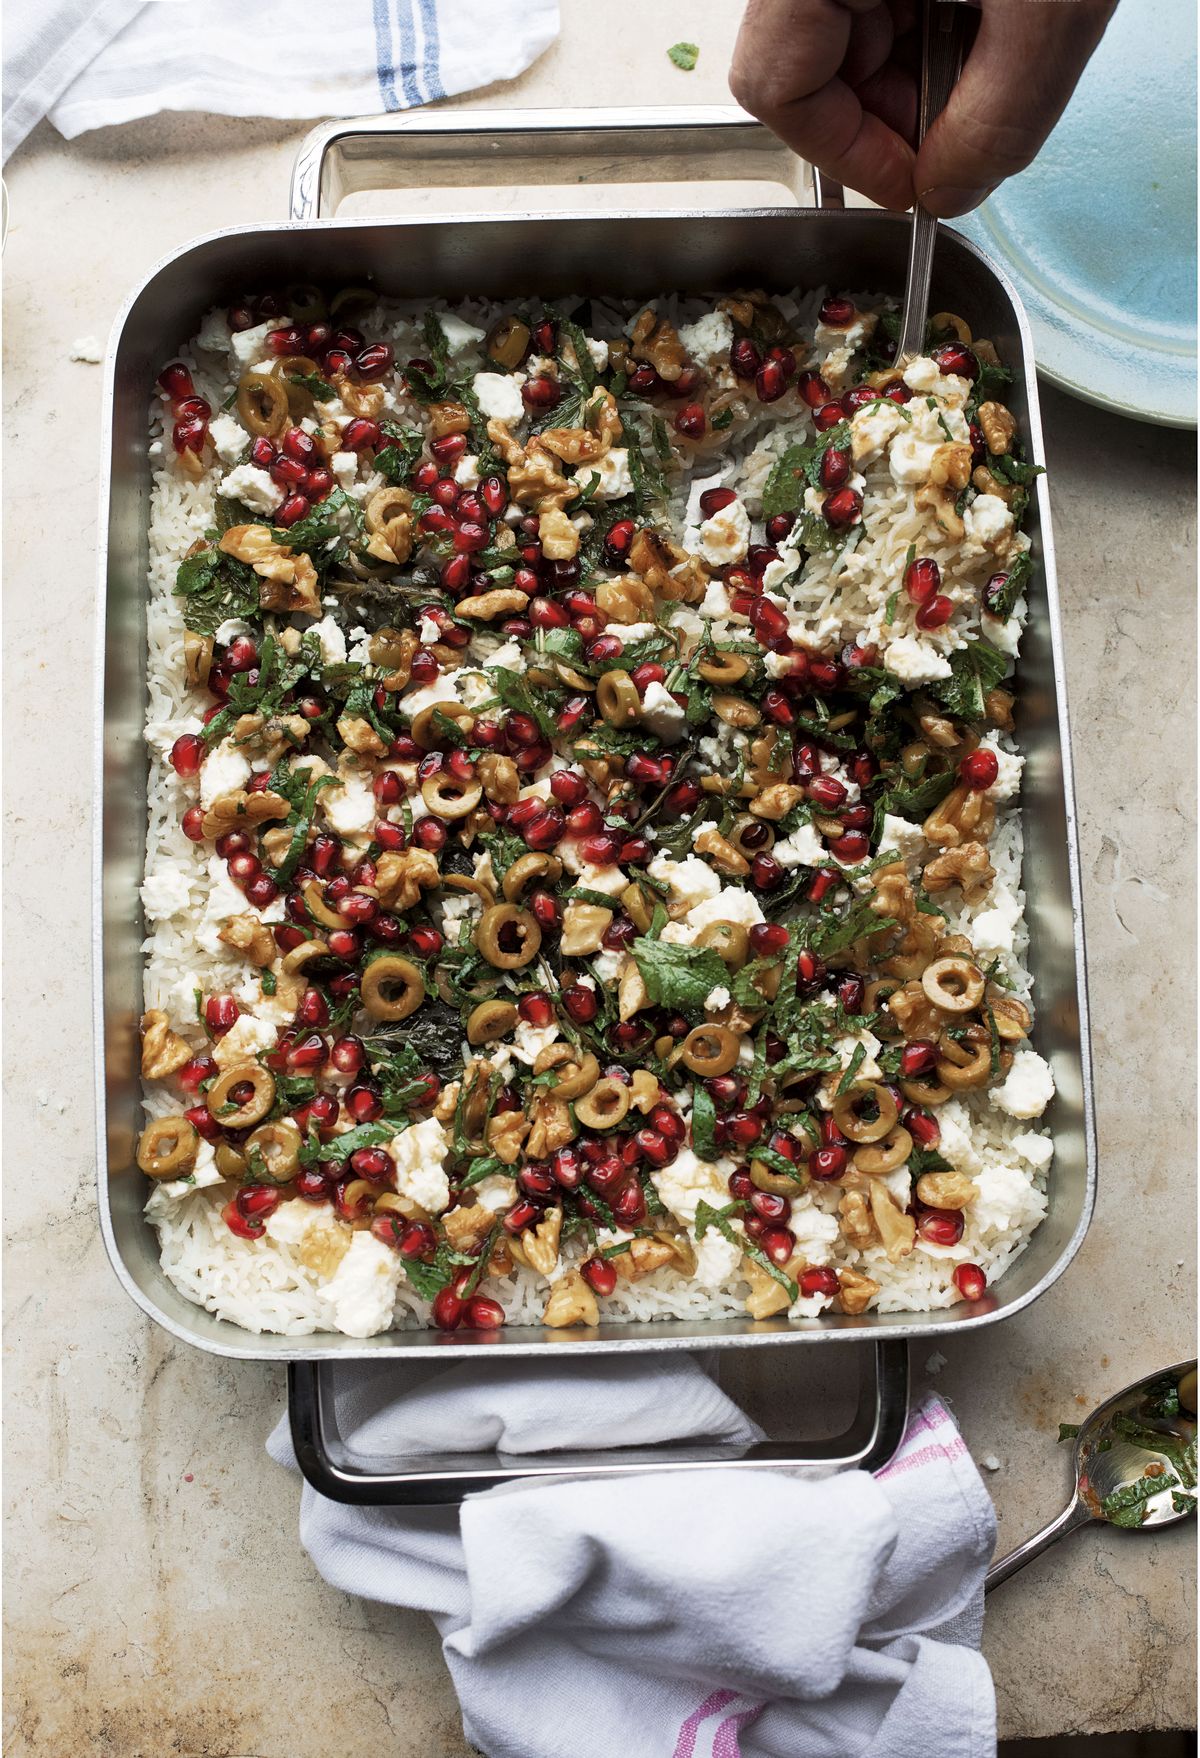 Yotam Ottolenghi’s Baked Mint Rice with Olive and Pomegranate Salsa